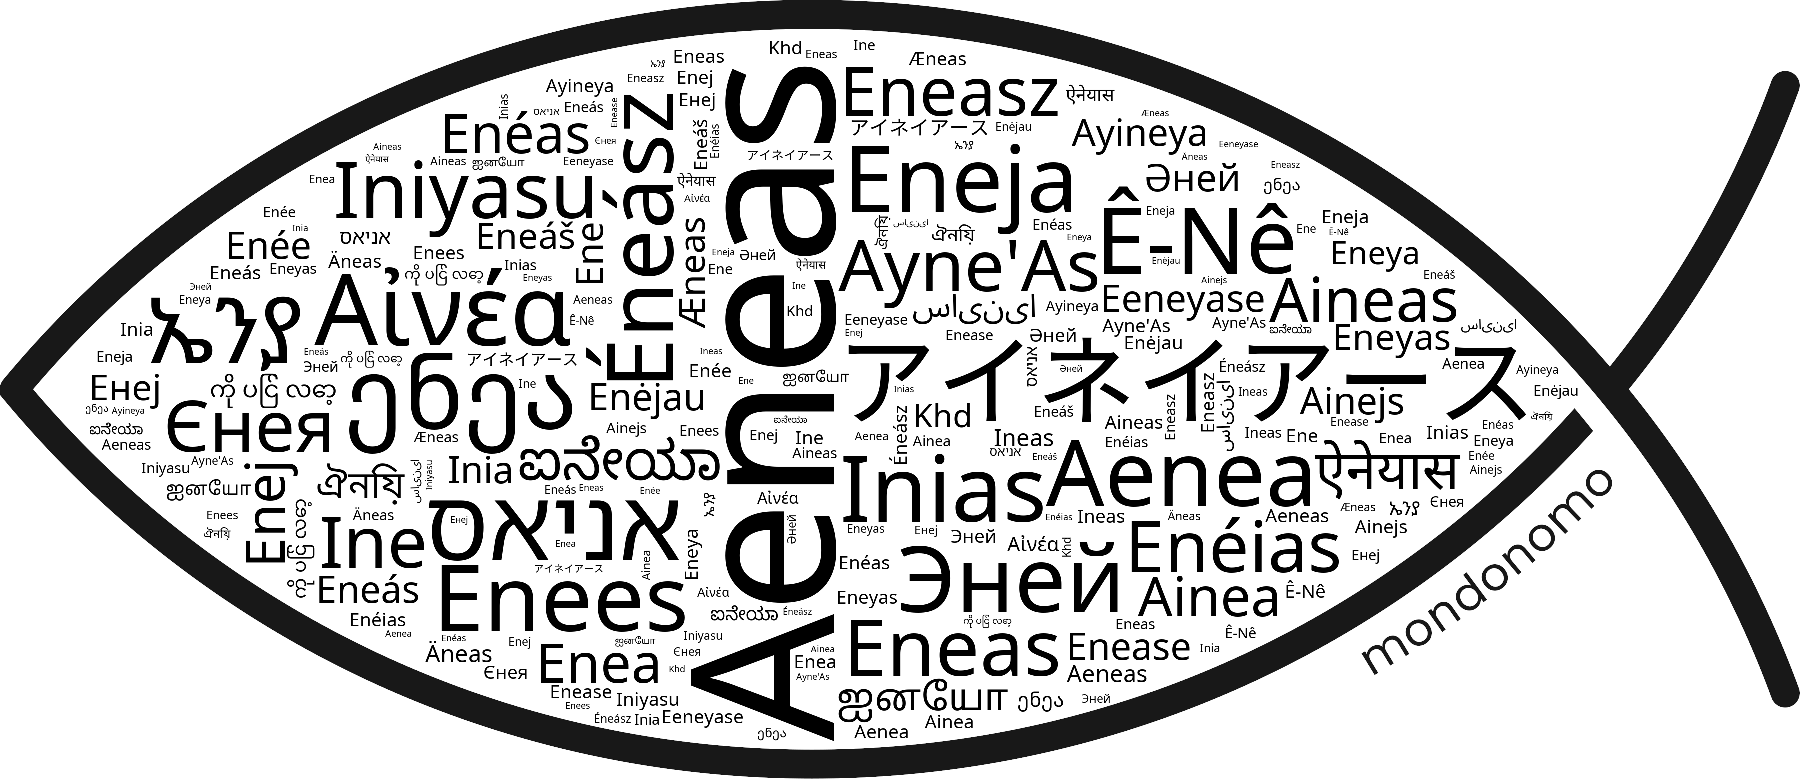 Name Aeneas in the world's Bibles